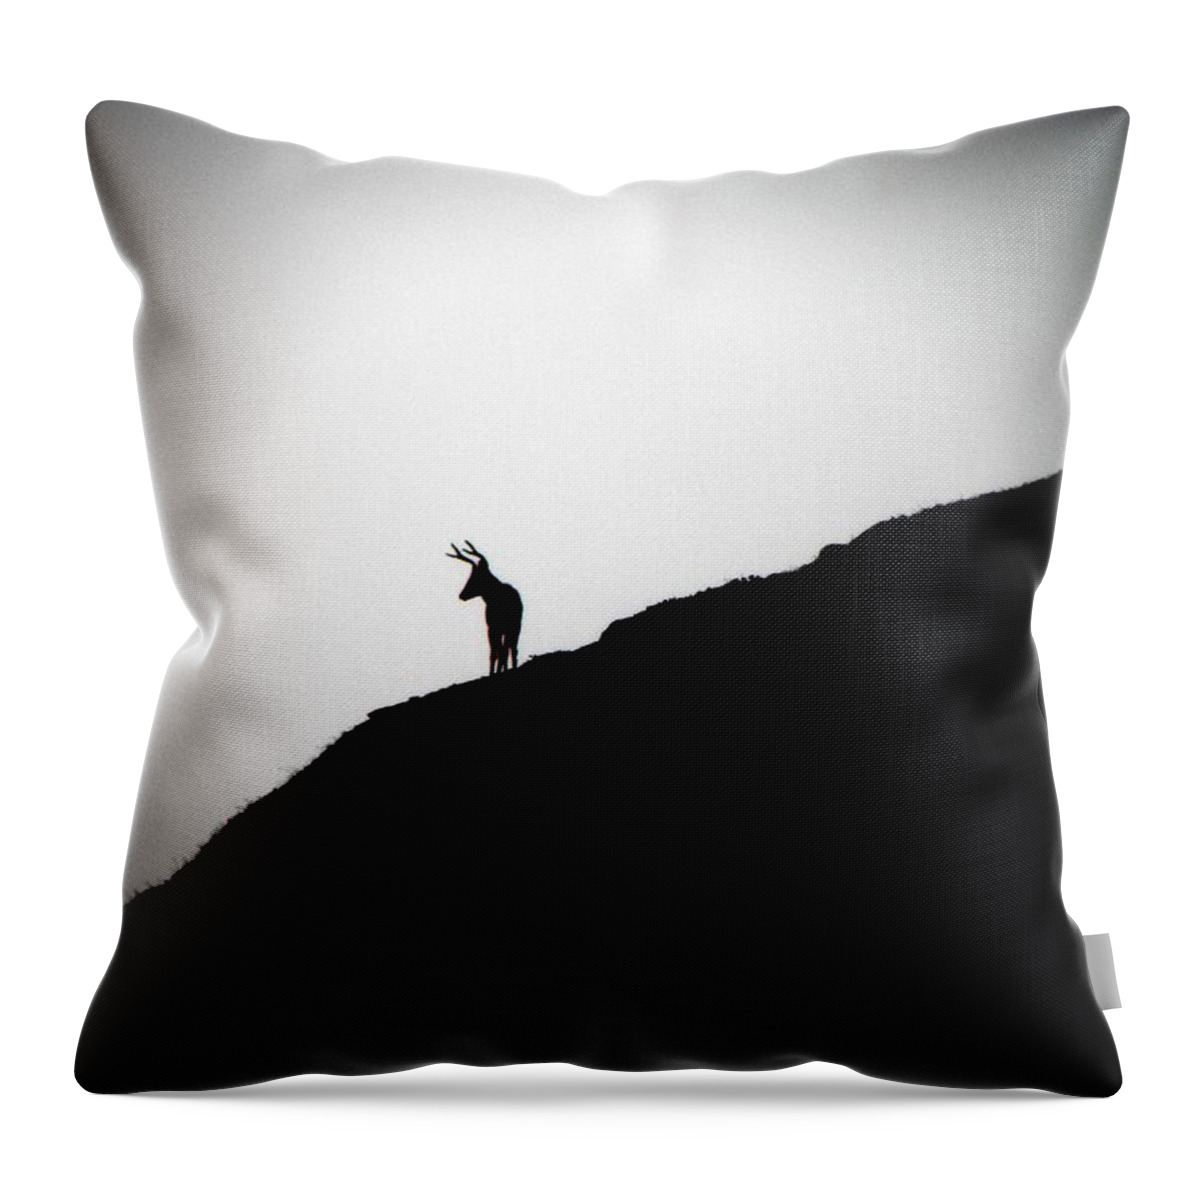 Landscape Throw Pillow featuring the photograph The Buck by Elizabeth Hoskinson